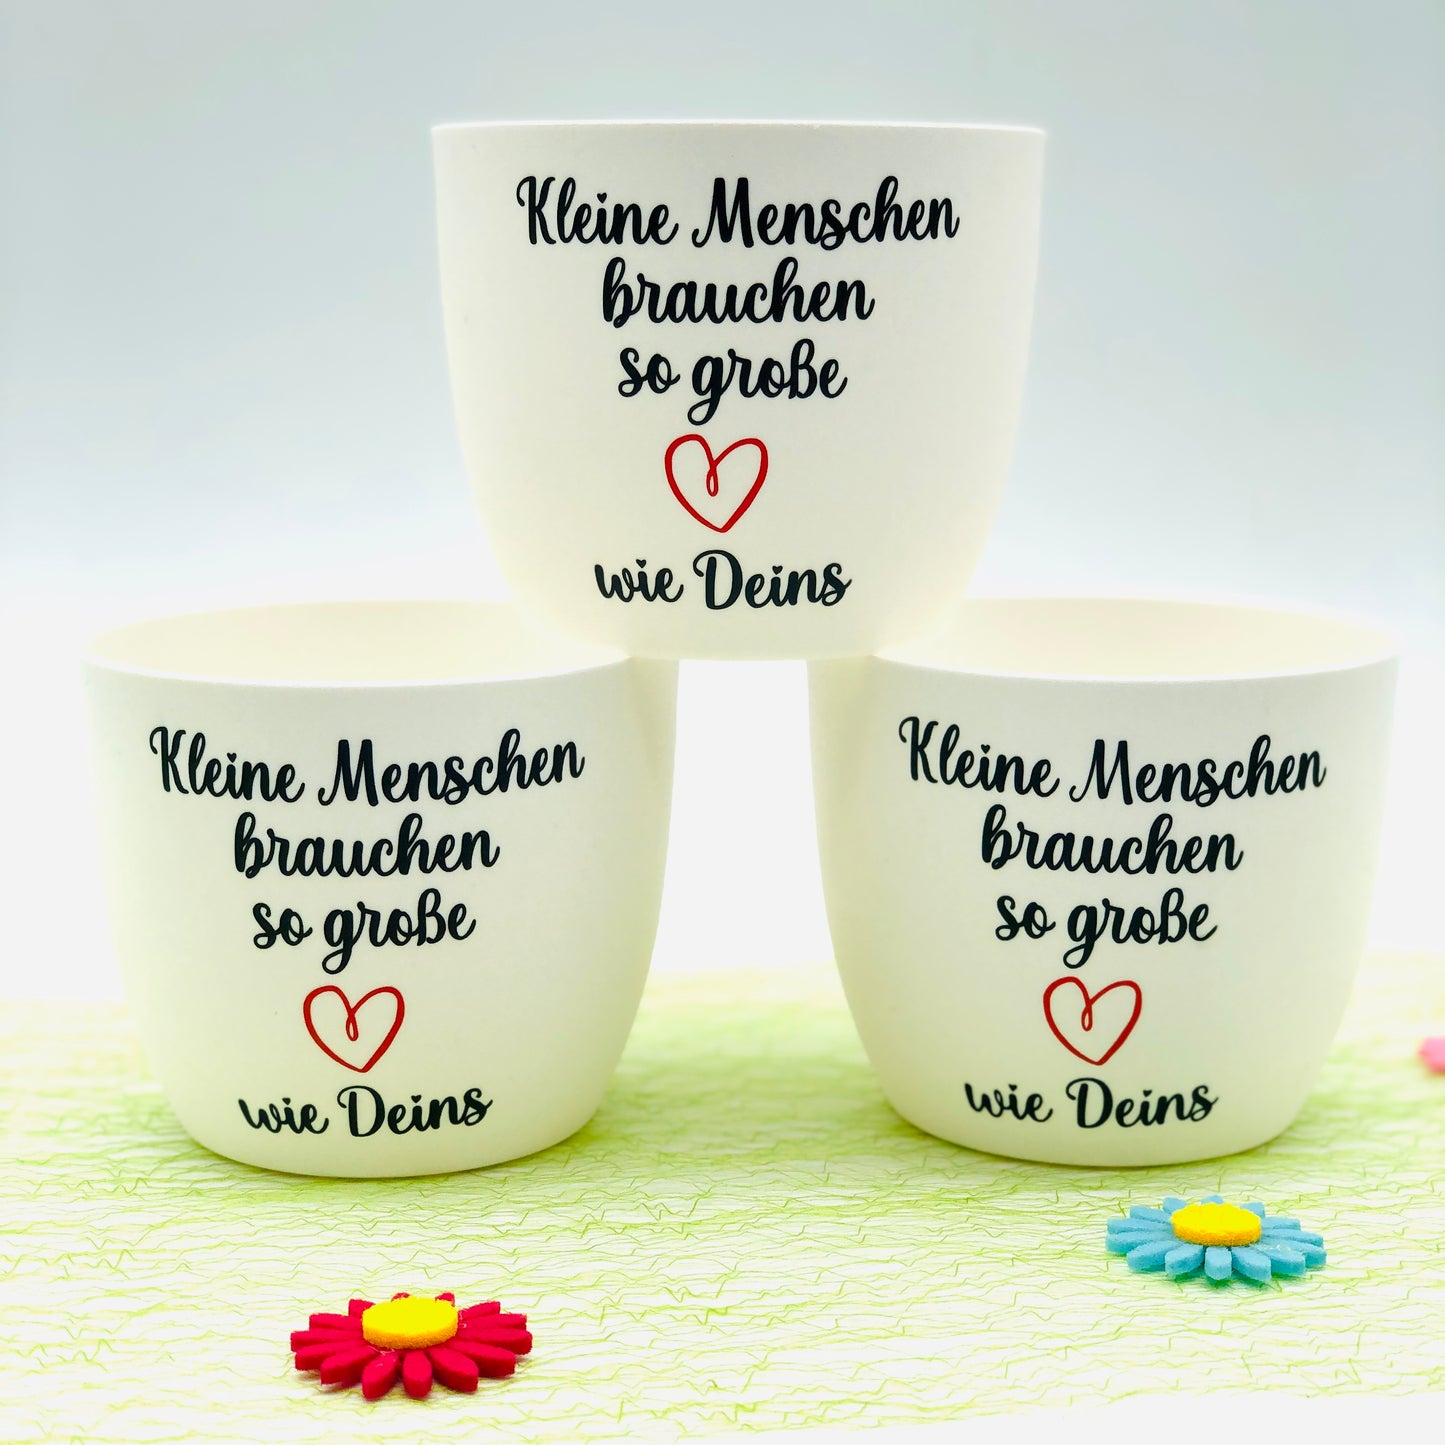 Flower pot white or black "Little people need hearts as big as yours" - farewell gift teacher or educator - personalized